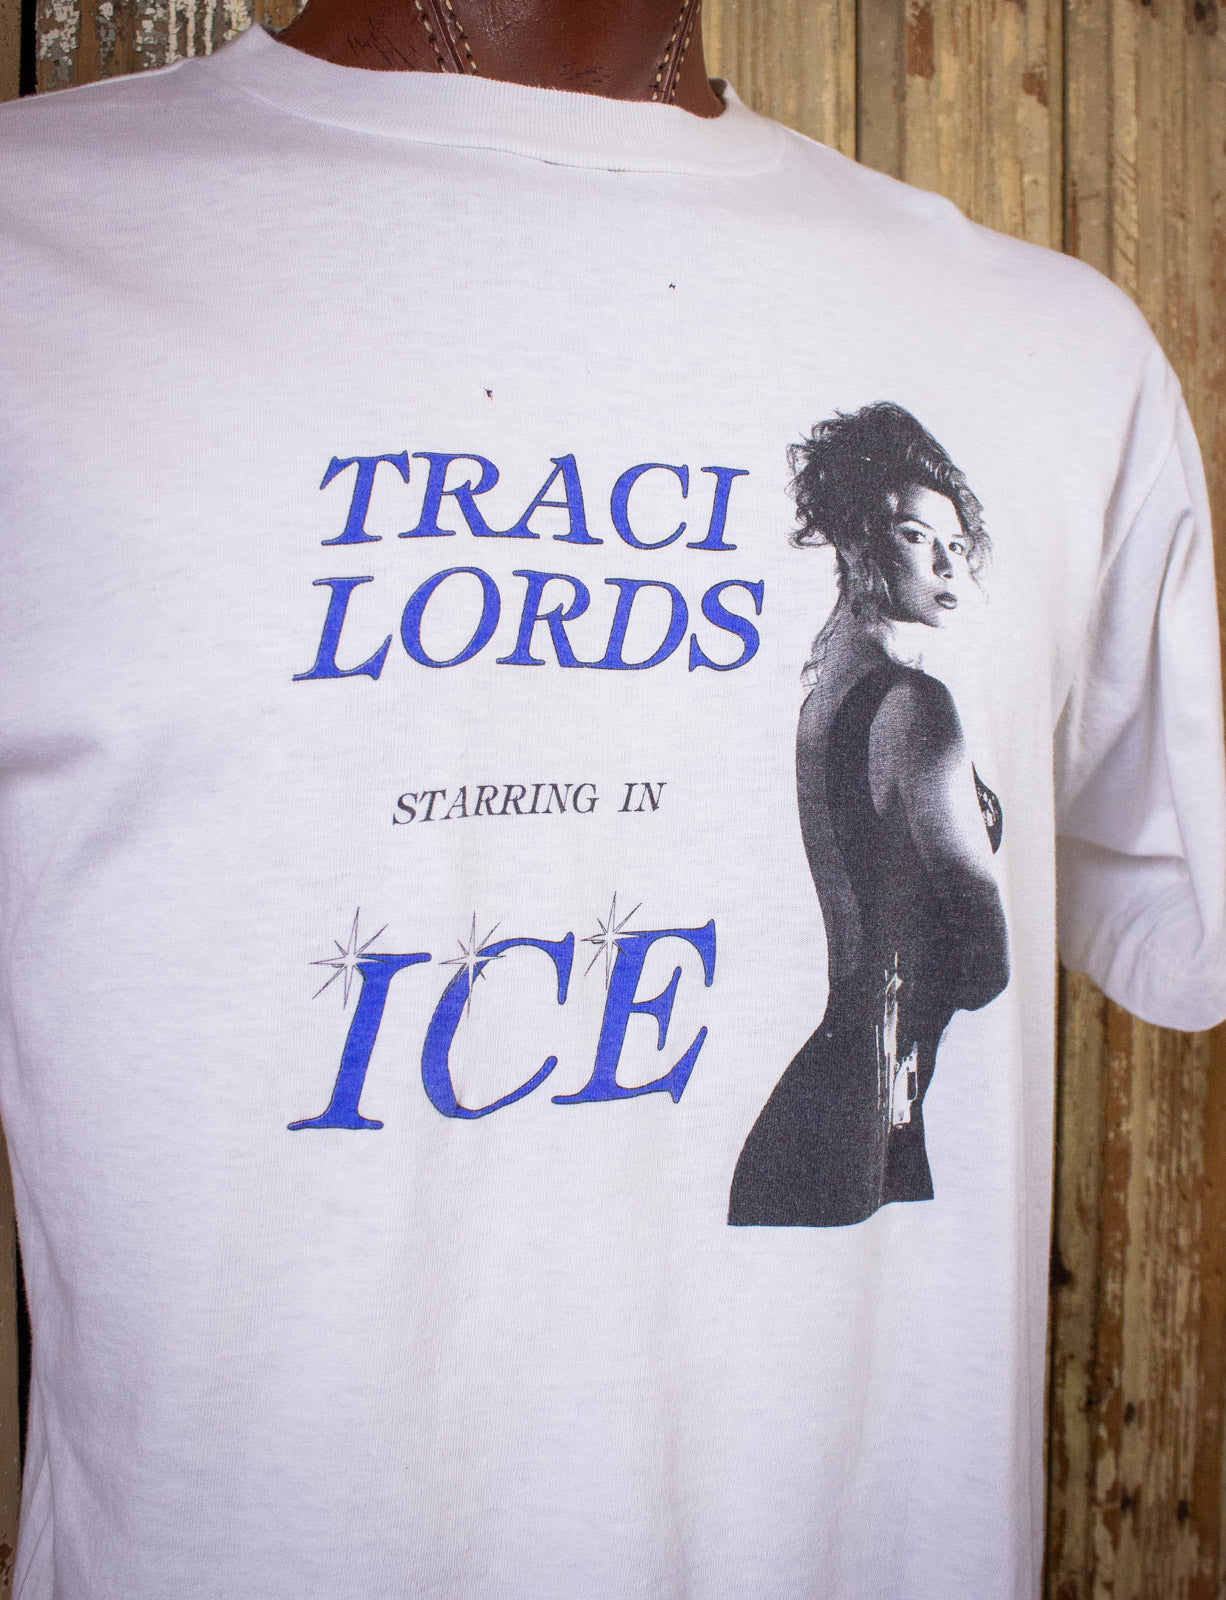 Vintage Traci Lords Ice Movie Promo Graphic T Shirt 1994 White XL